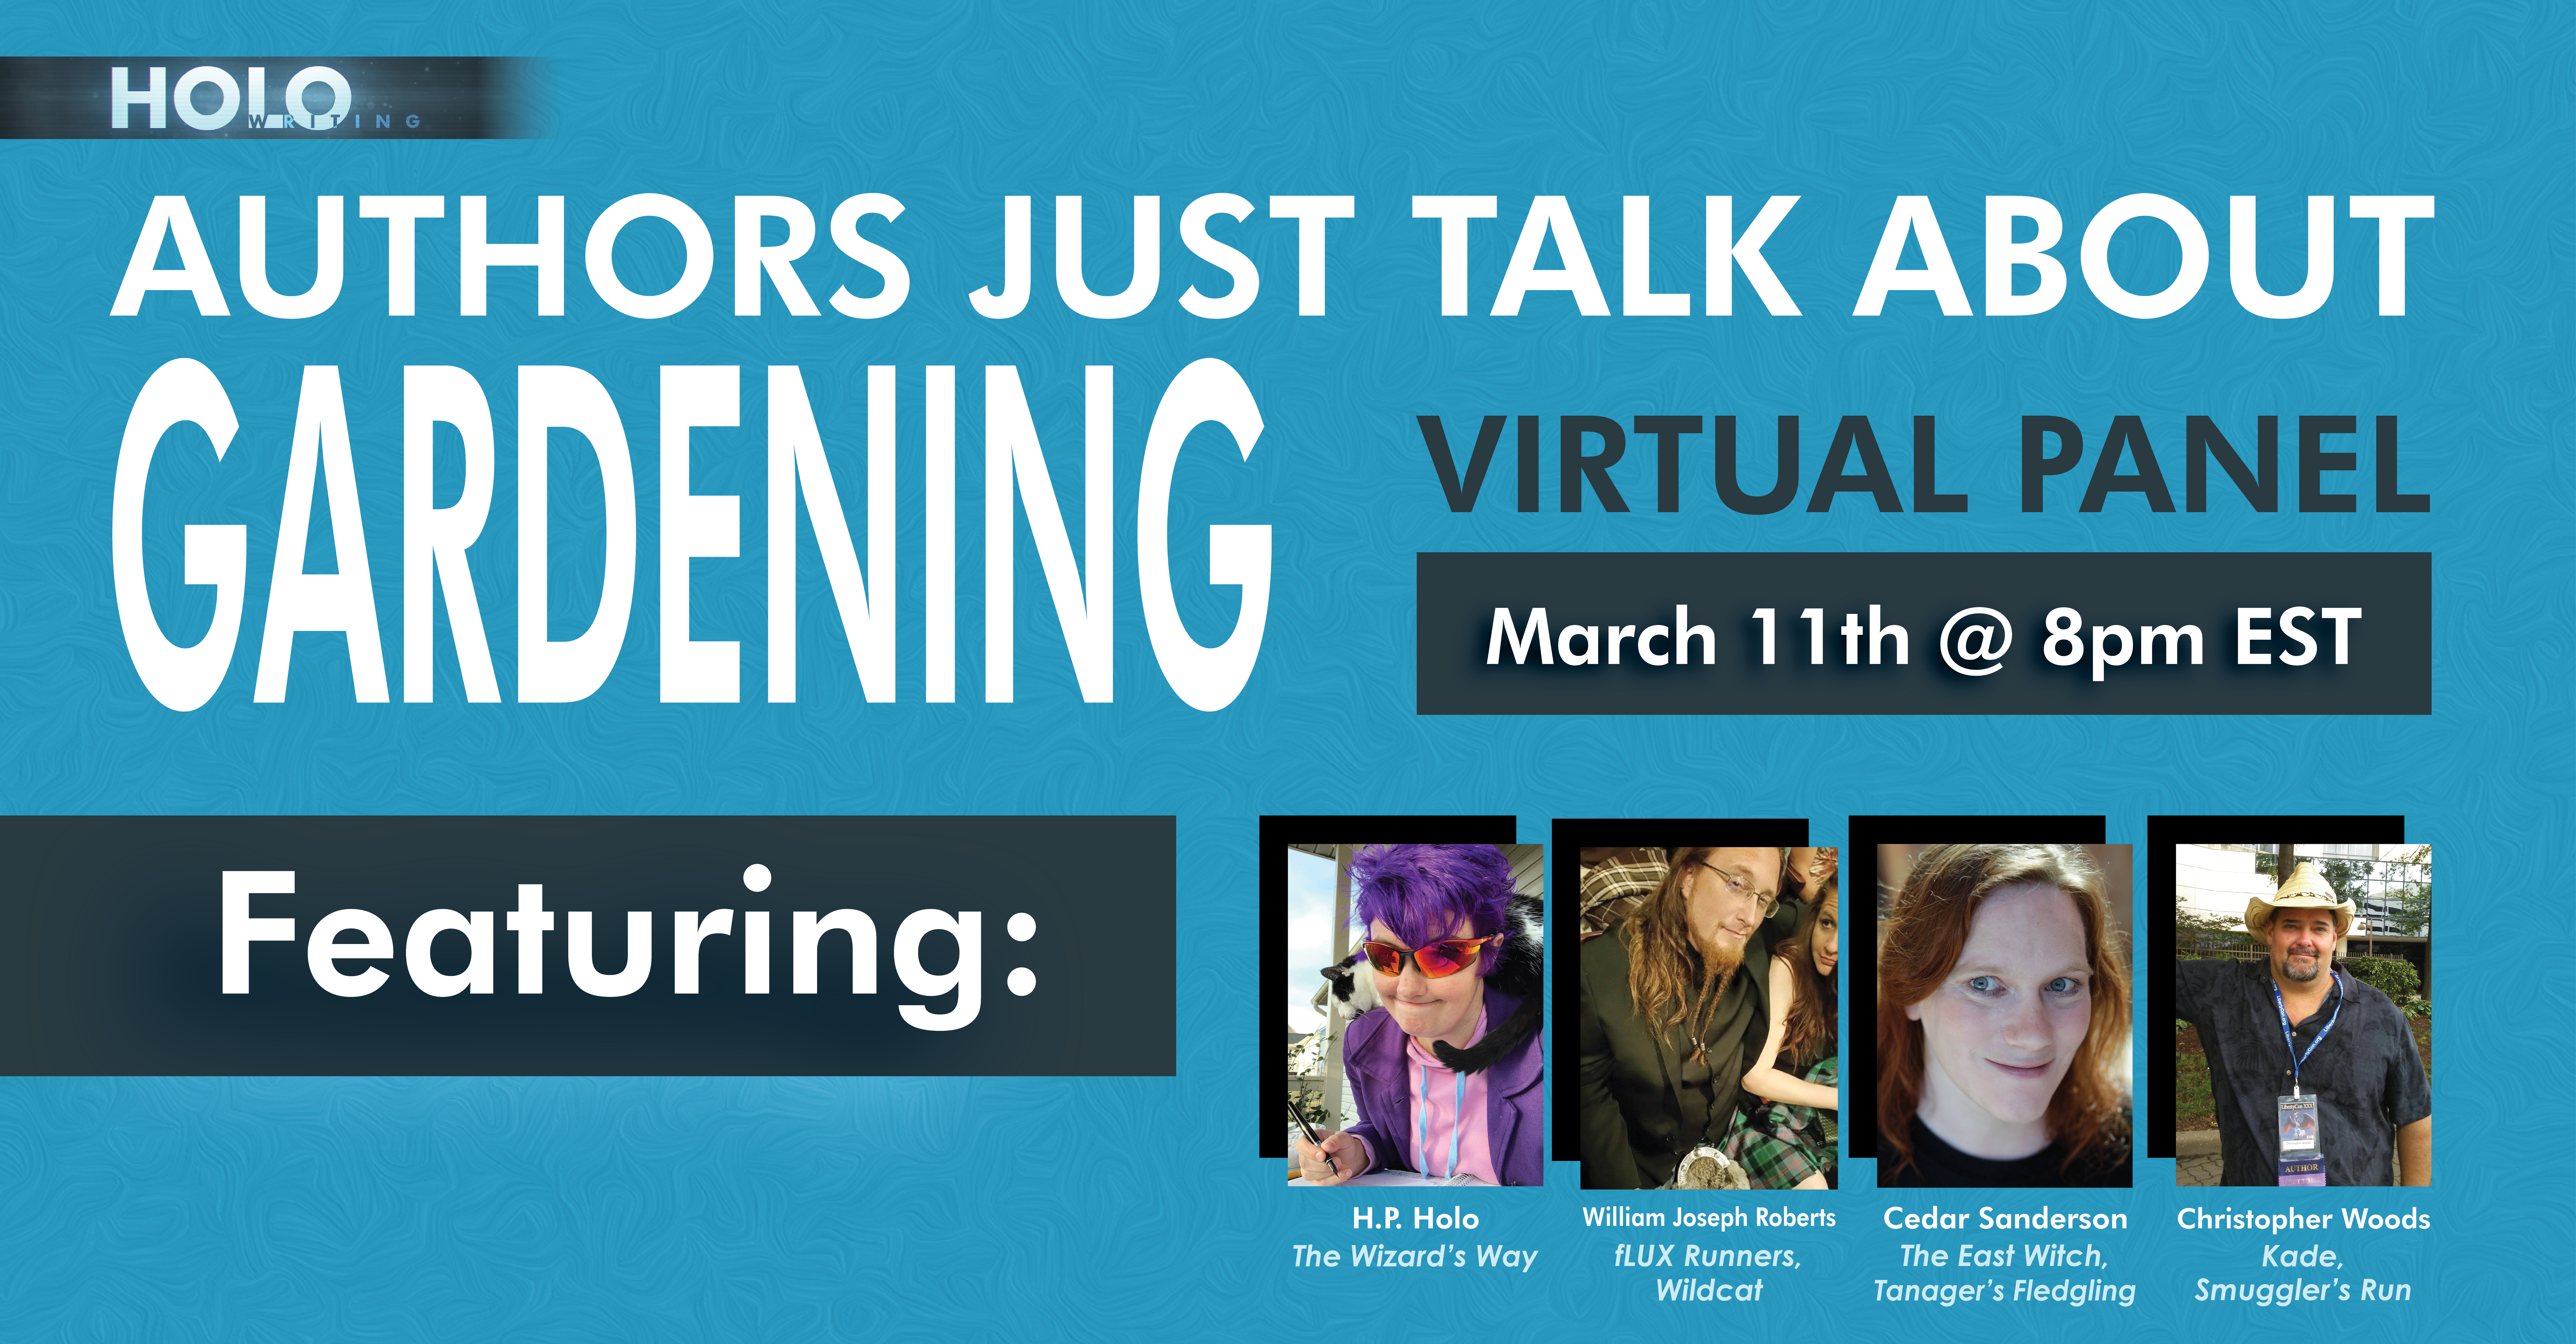 AUTHORS JUST TALK ABOUT GARDENING (VIRTUAL PANEL)